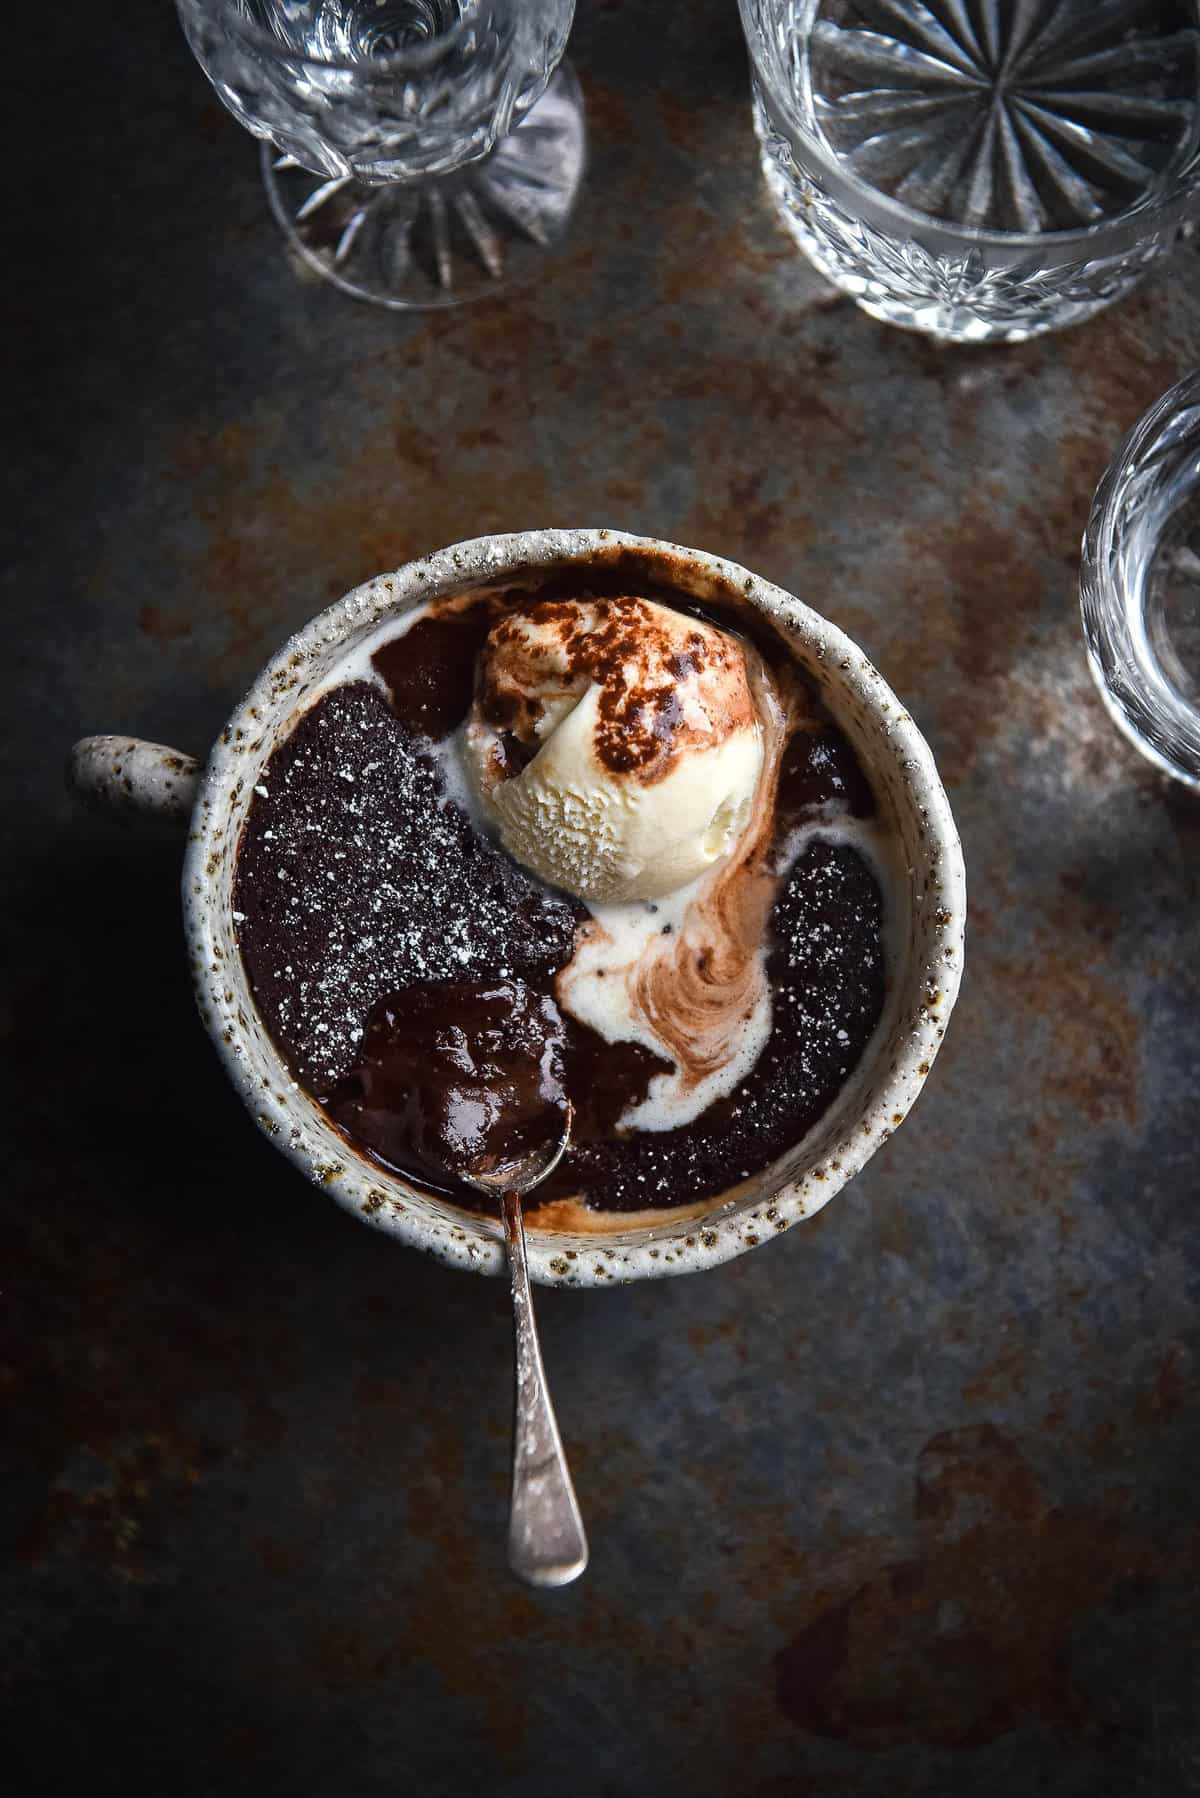 A moody image of a chocolate mug cake on a moody steel backdrop. The mug cake is topped with melting vanilla ice cream.